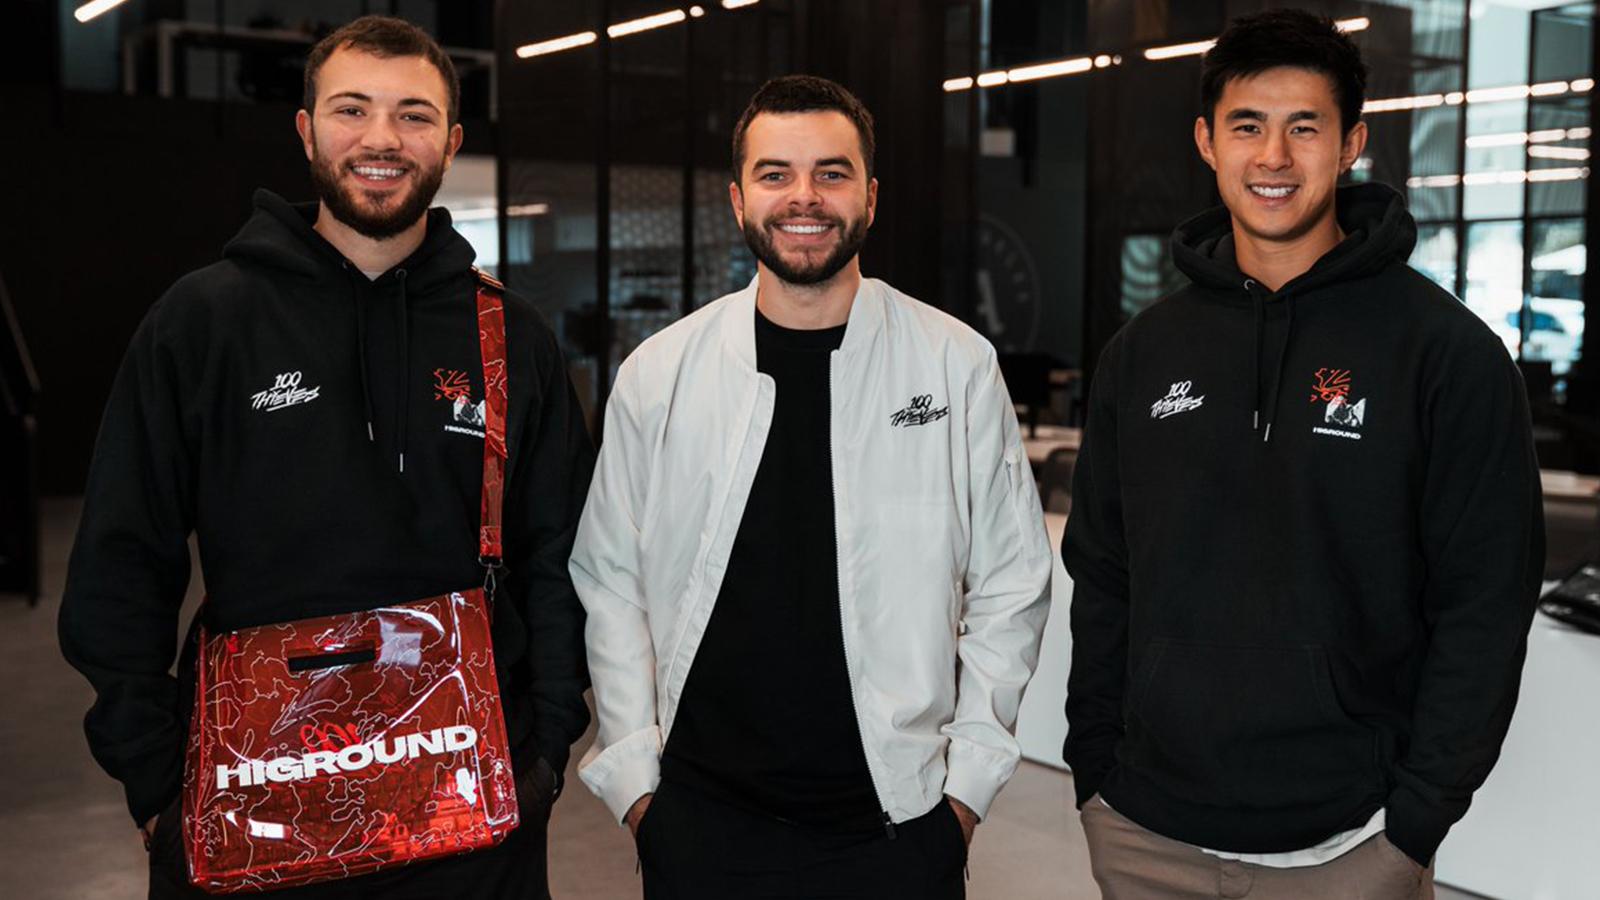 Higround Founders with Nadeshot